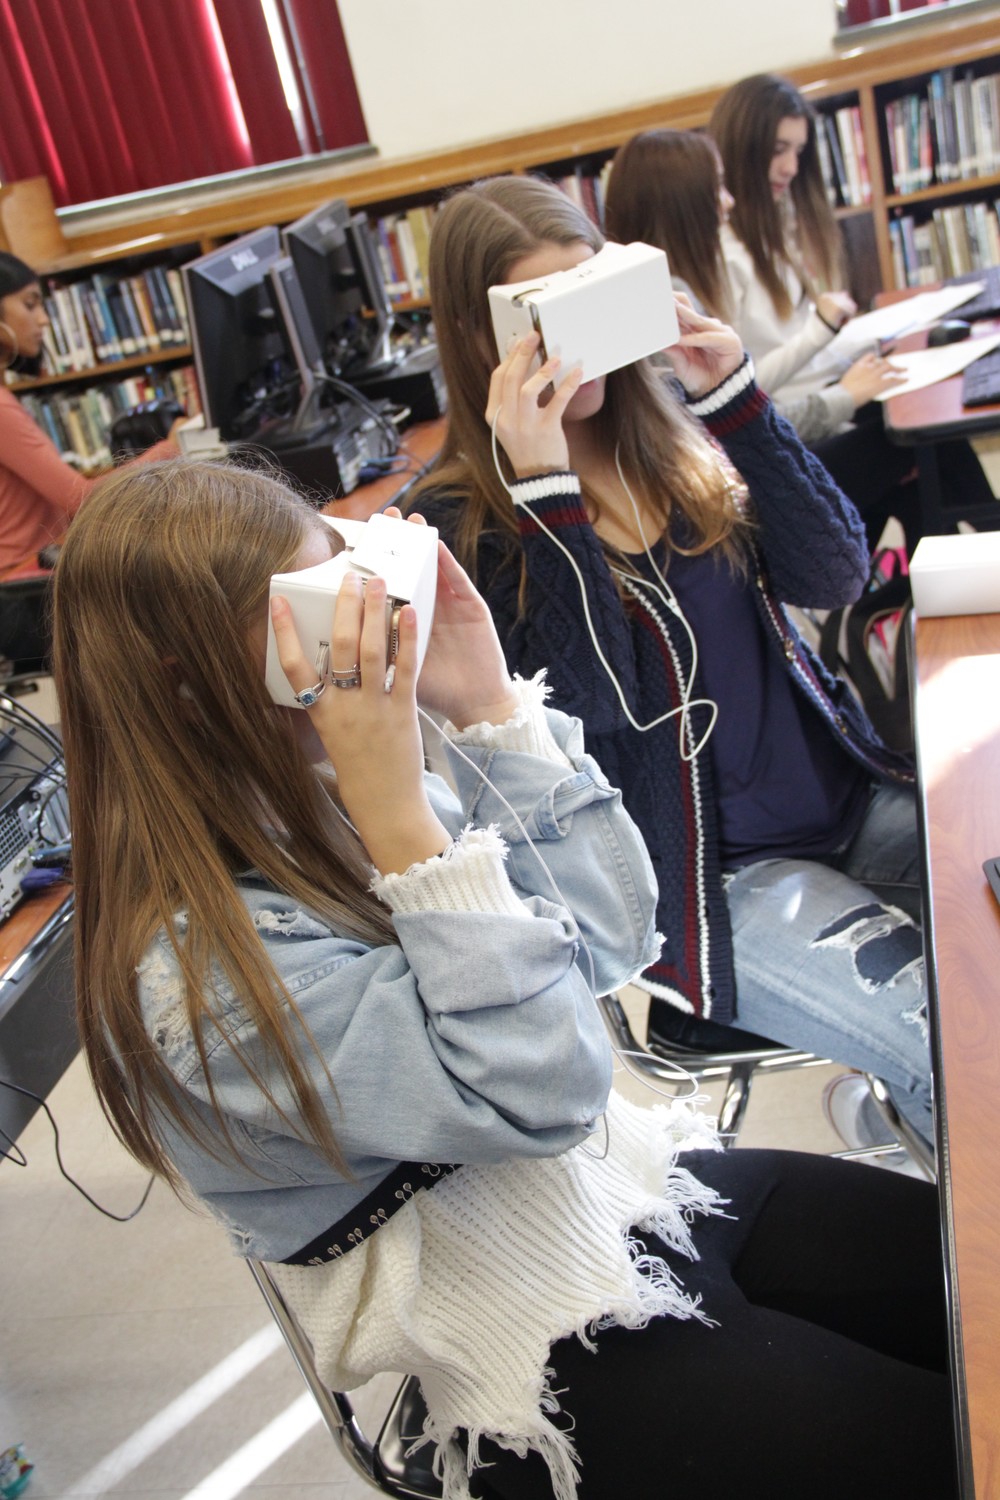 Students in Christine O’Neill’s Spanish class at Mepham High School in North Bellmore used virtual-reality technology to tour Machu Picchu, in Peru, on Dec. 7.